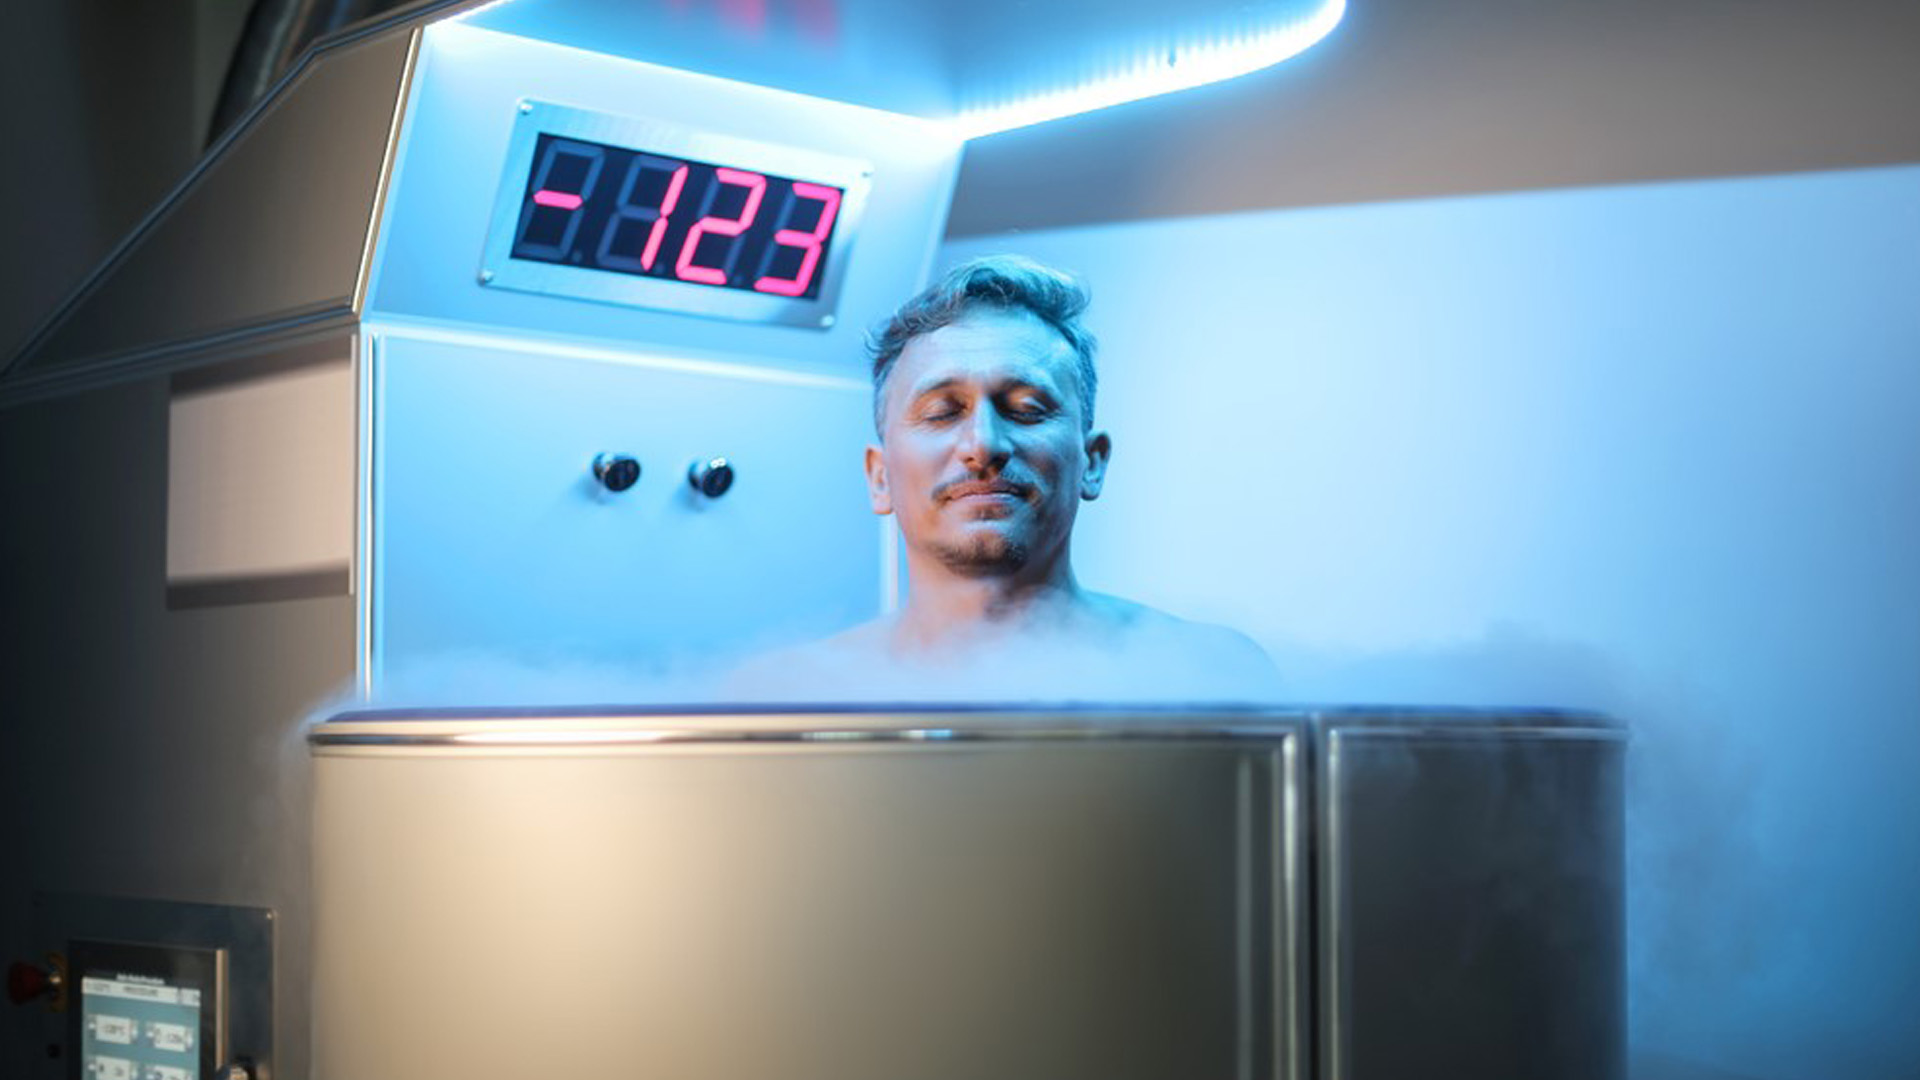 Benefits of Cryotherapy